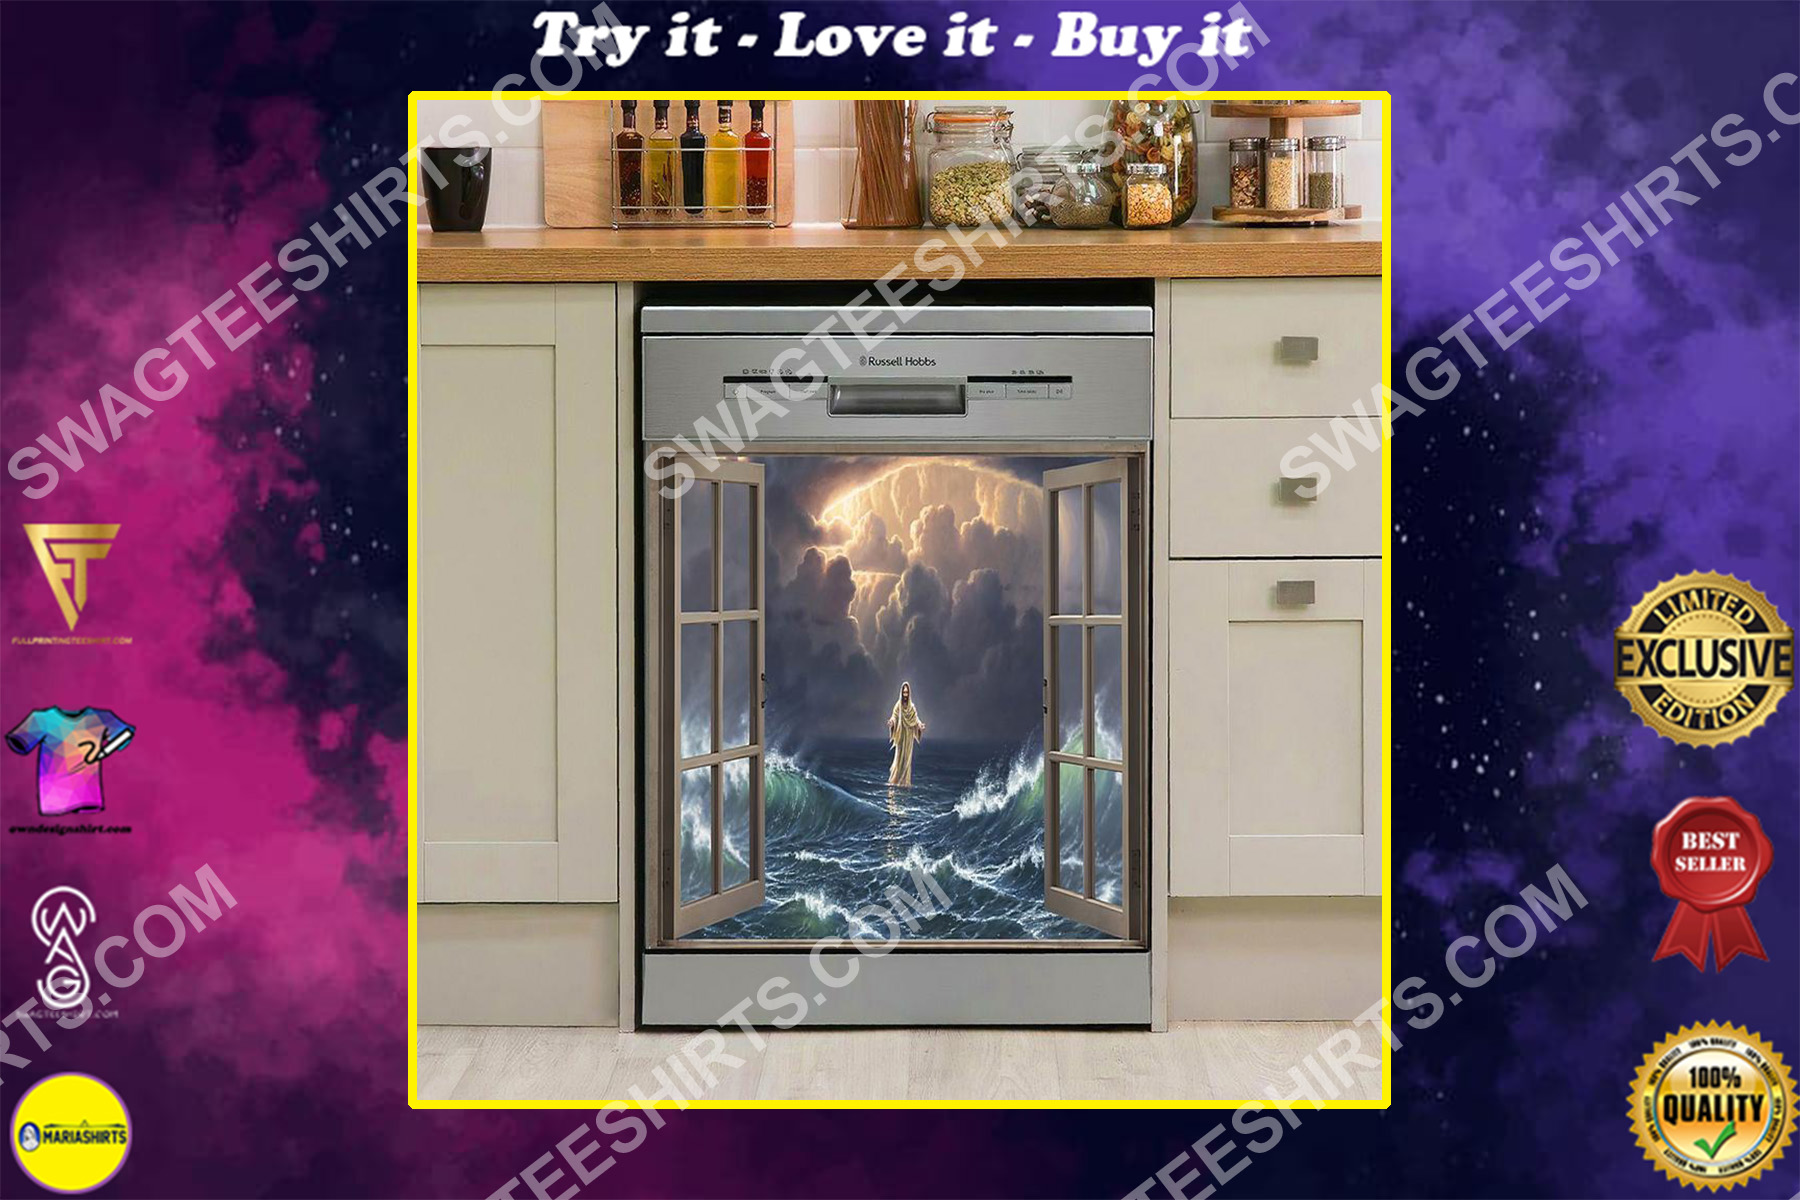 God walking on the water kitchen decorative dishwasher magnet cover